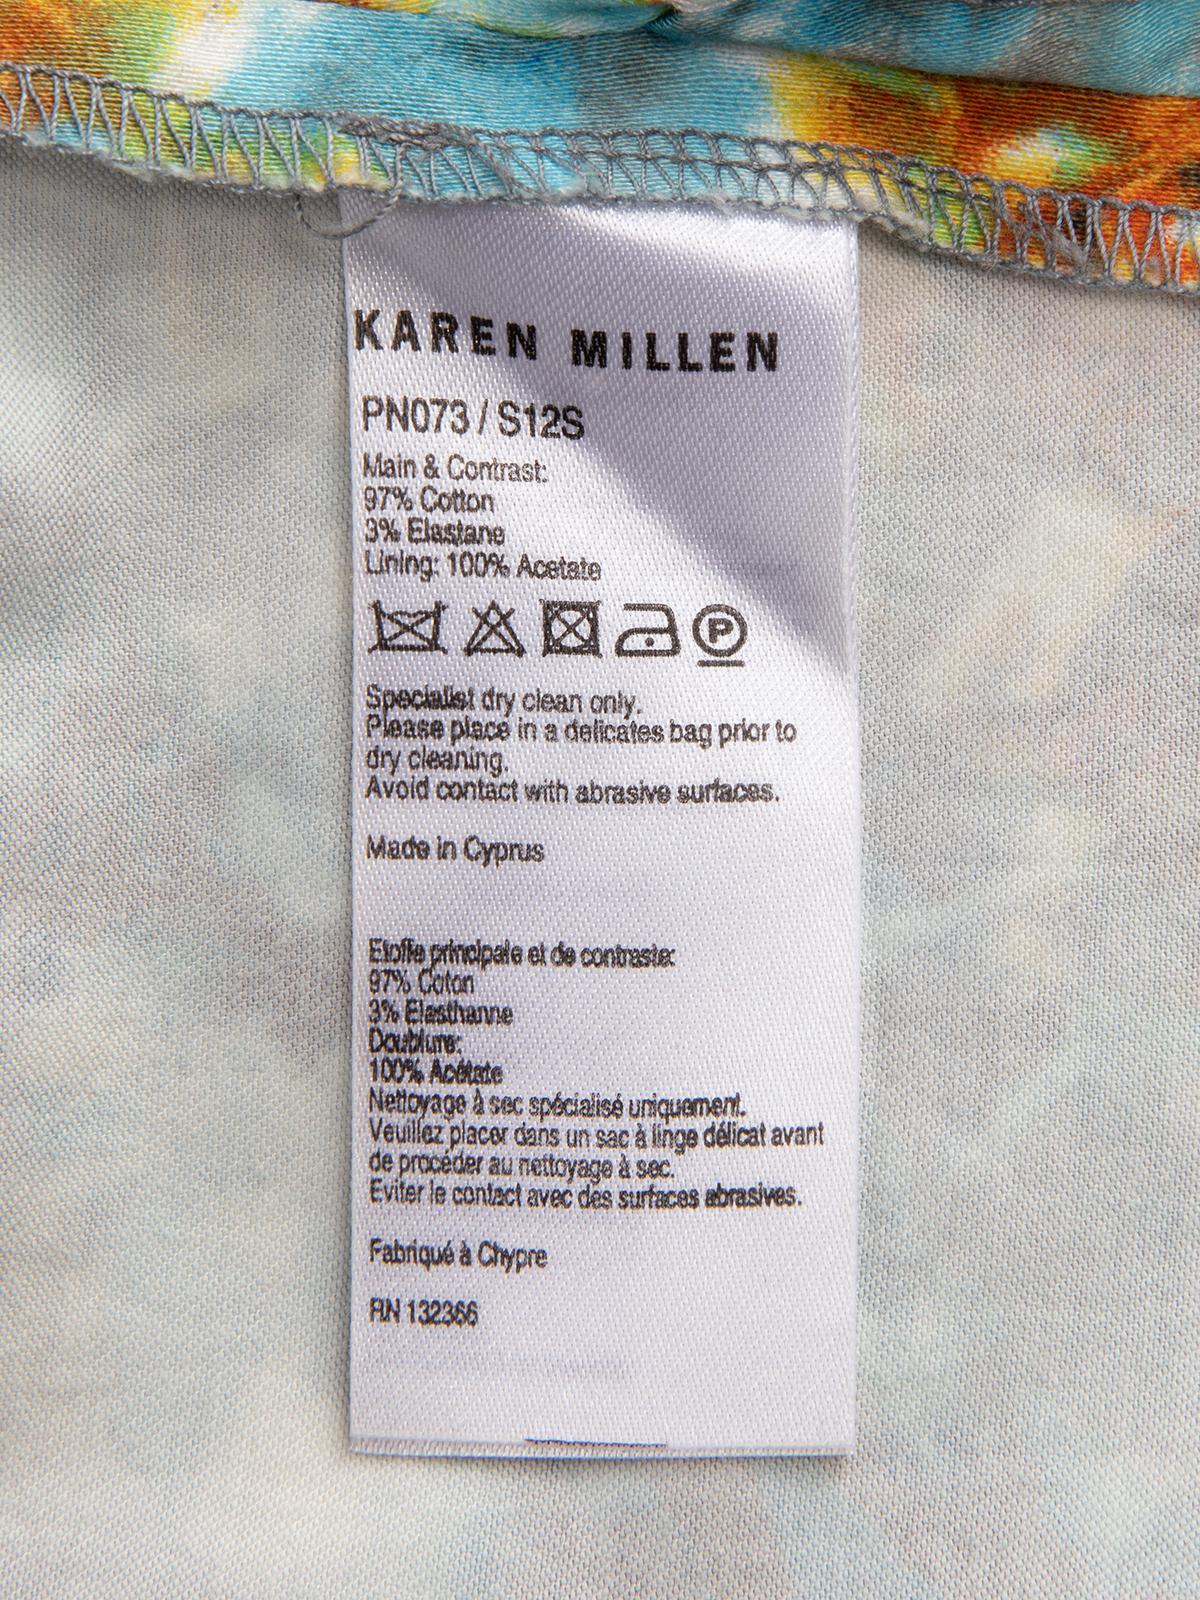 Karen Millen Women's Floral Trousers with Ankle Zip For Sale 3